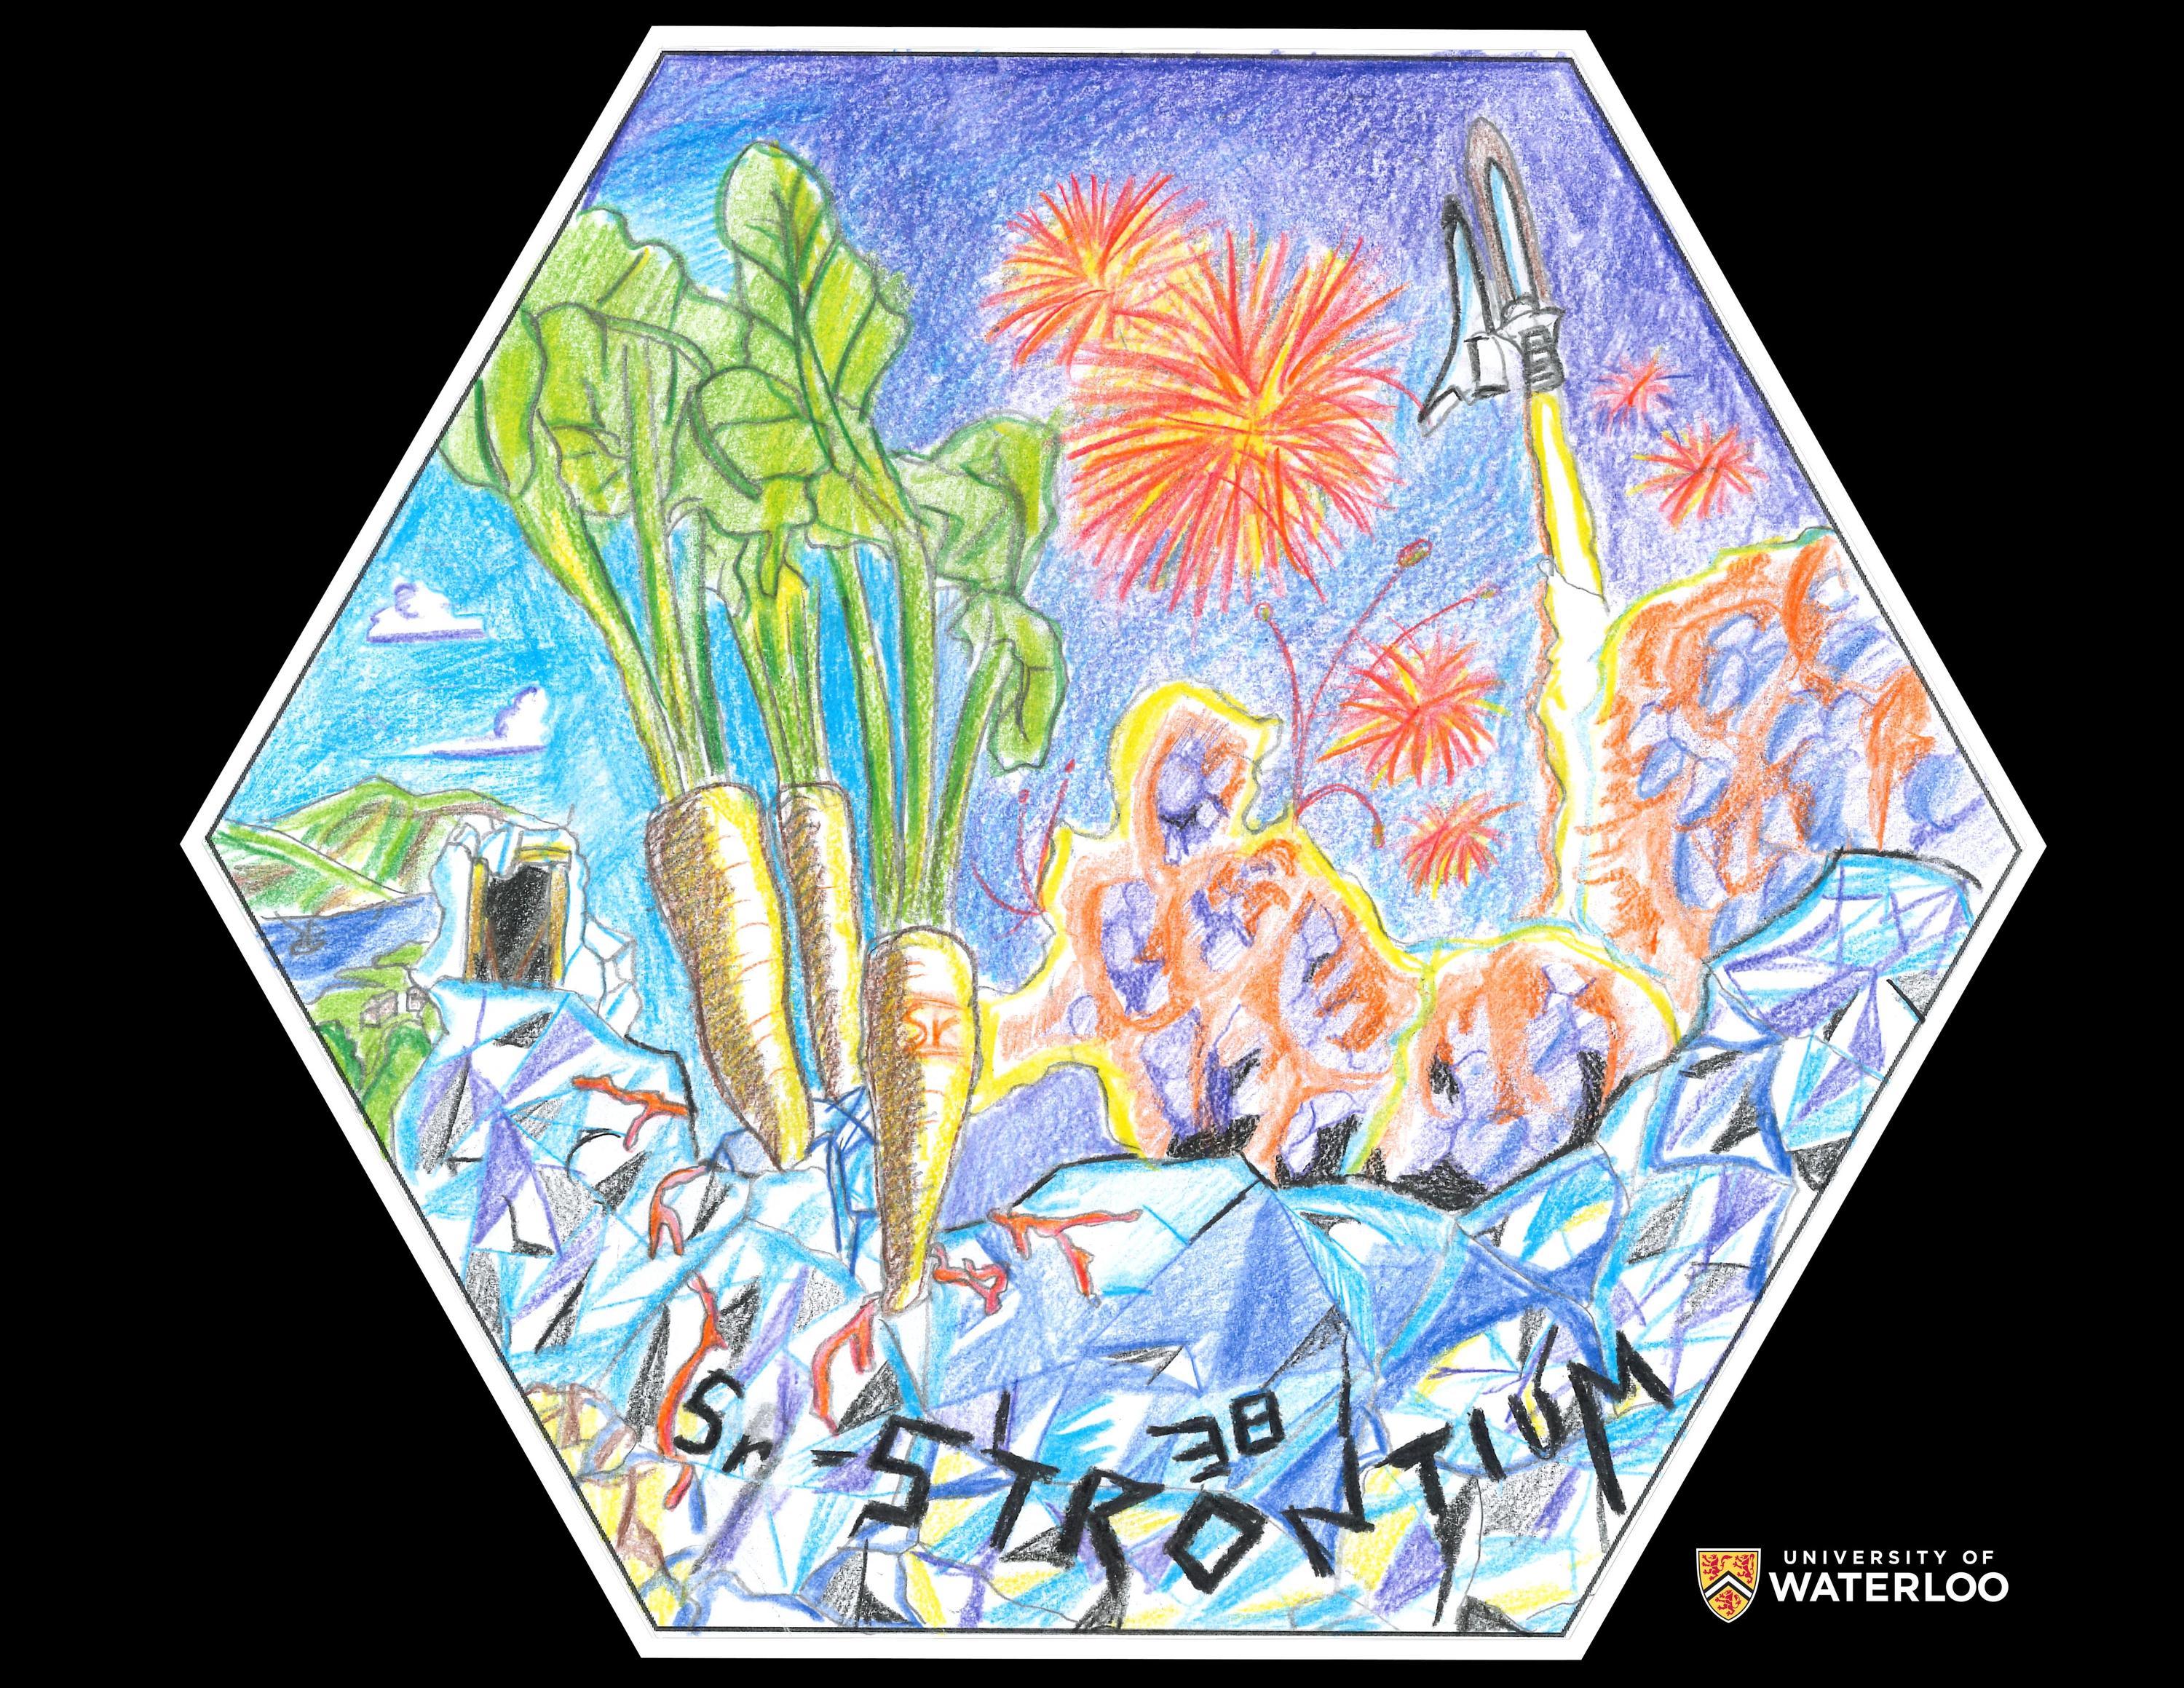 Coloured pencil on paper. A collage of images including fireworks, carrots, the space shuttle across the top, and silvery metal on the bottom. The chemical symbol “Sr”, “Strontium”, and atomic number “38” are weaved into the bottom illustration.